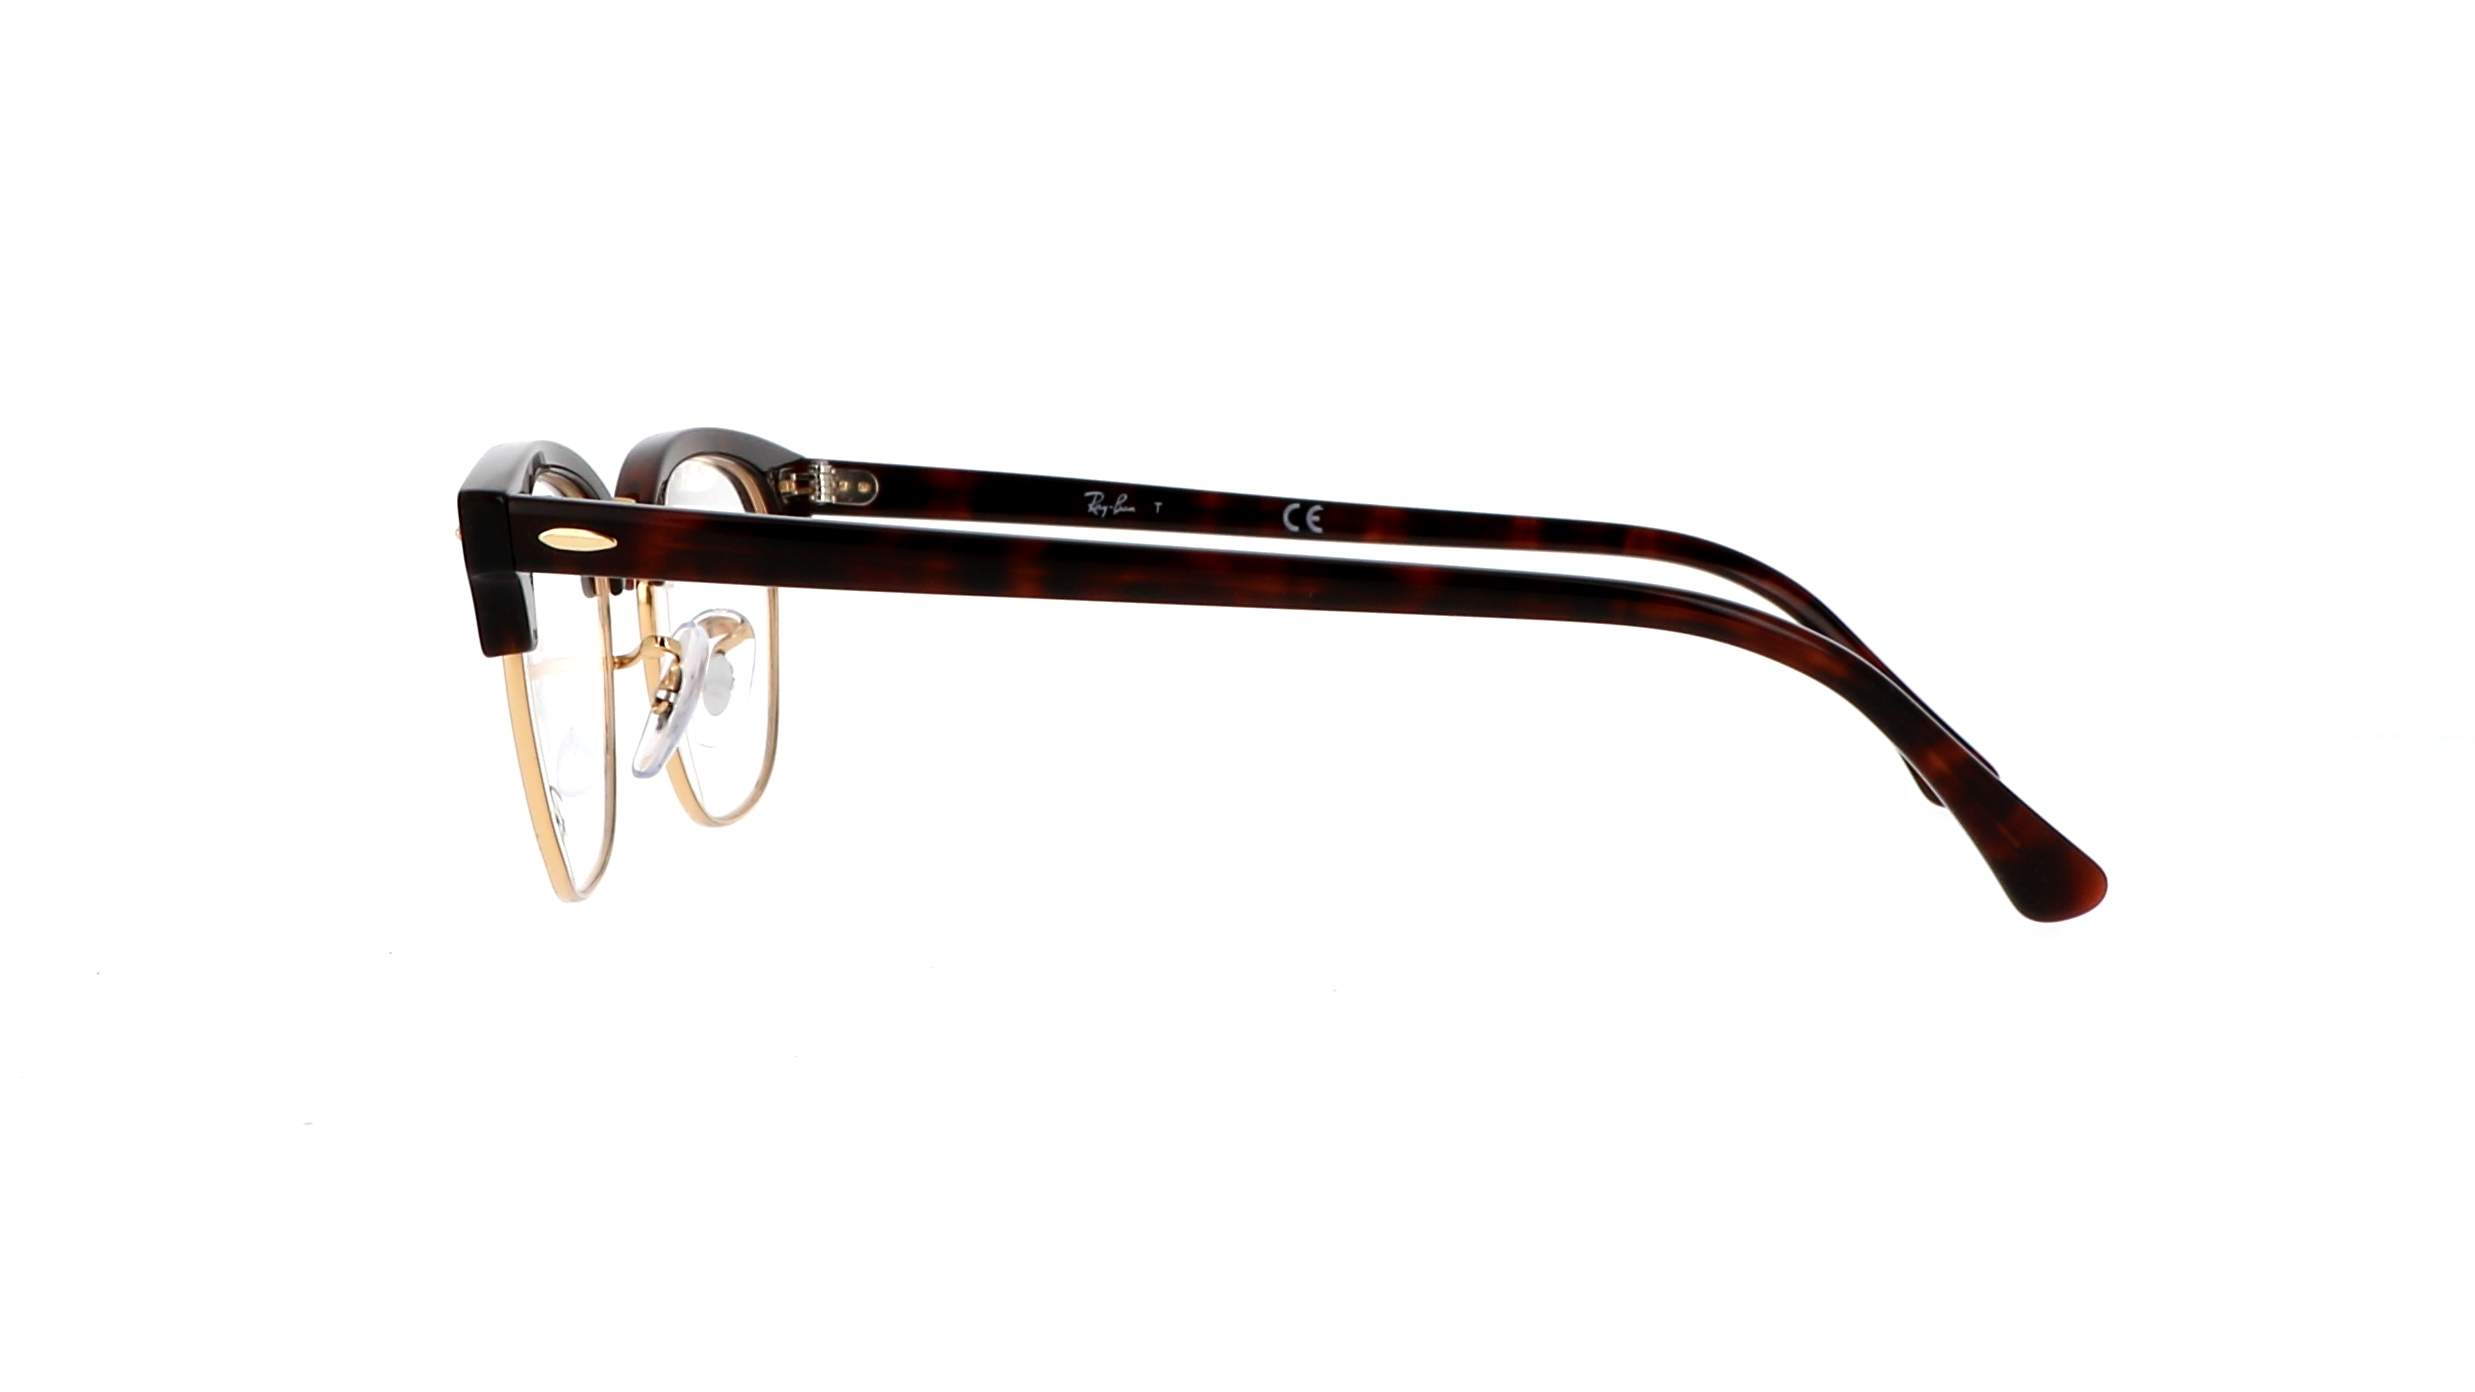 Eyeglasses Ray Ban Clubmaster Optics Tortoise Rx5154 Rb5154 8058 49 21 Small In Stock Price